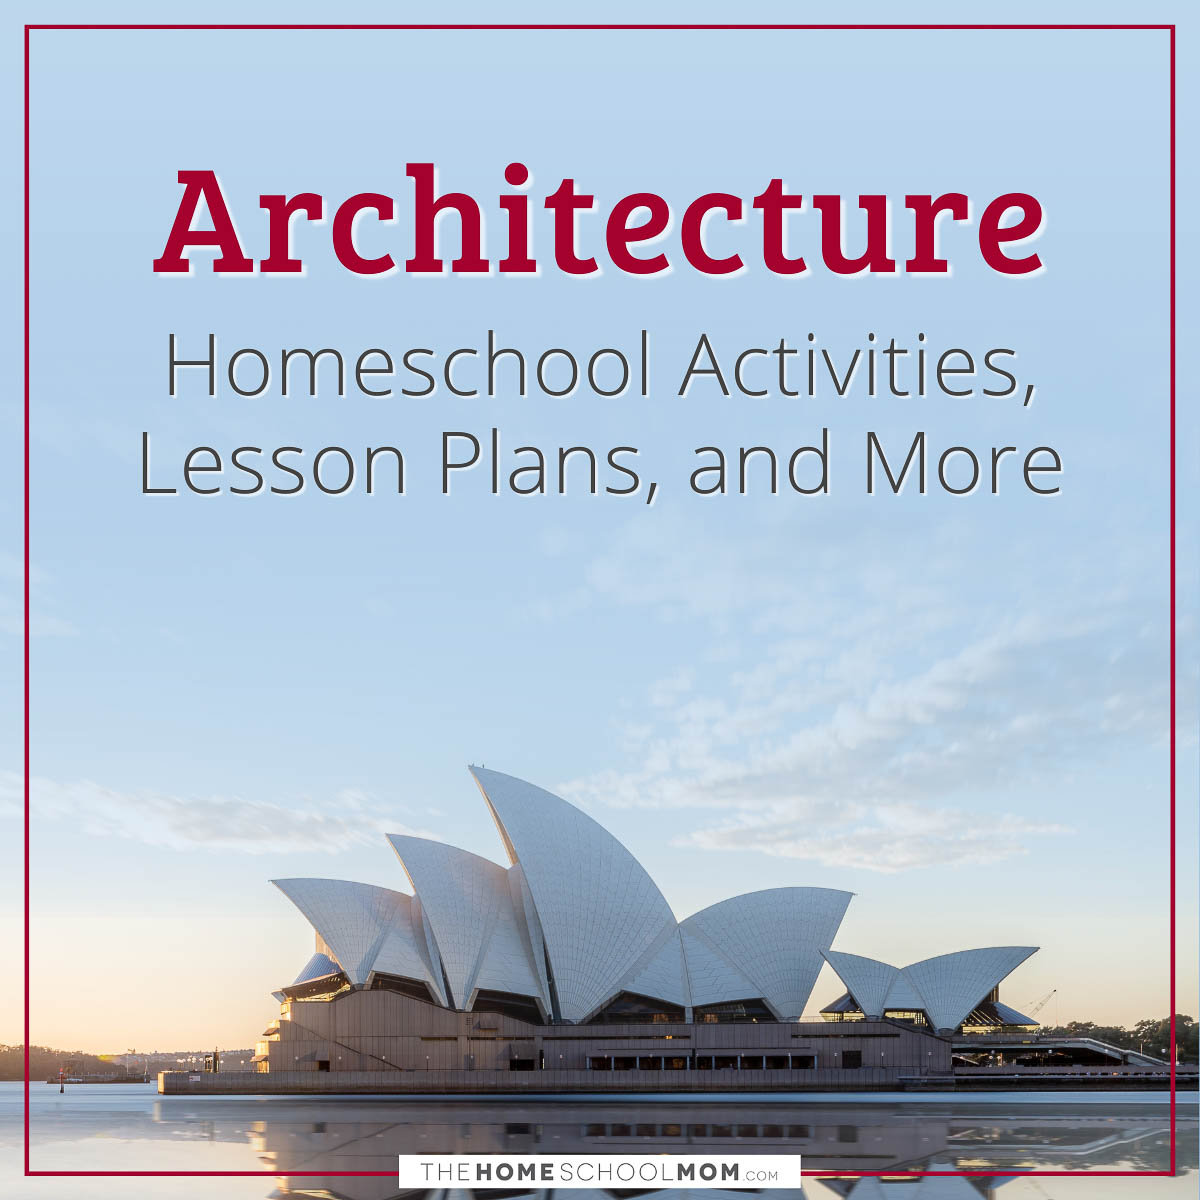 Architecture Homeschool Activities, Lesson Plans, and More from TheHomeschoolMom.com